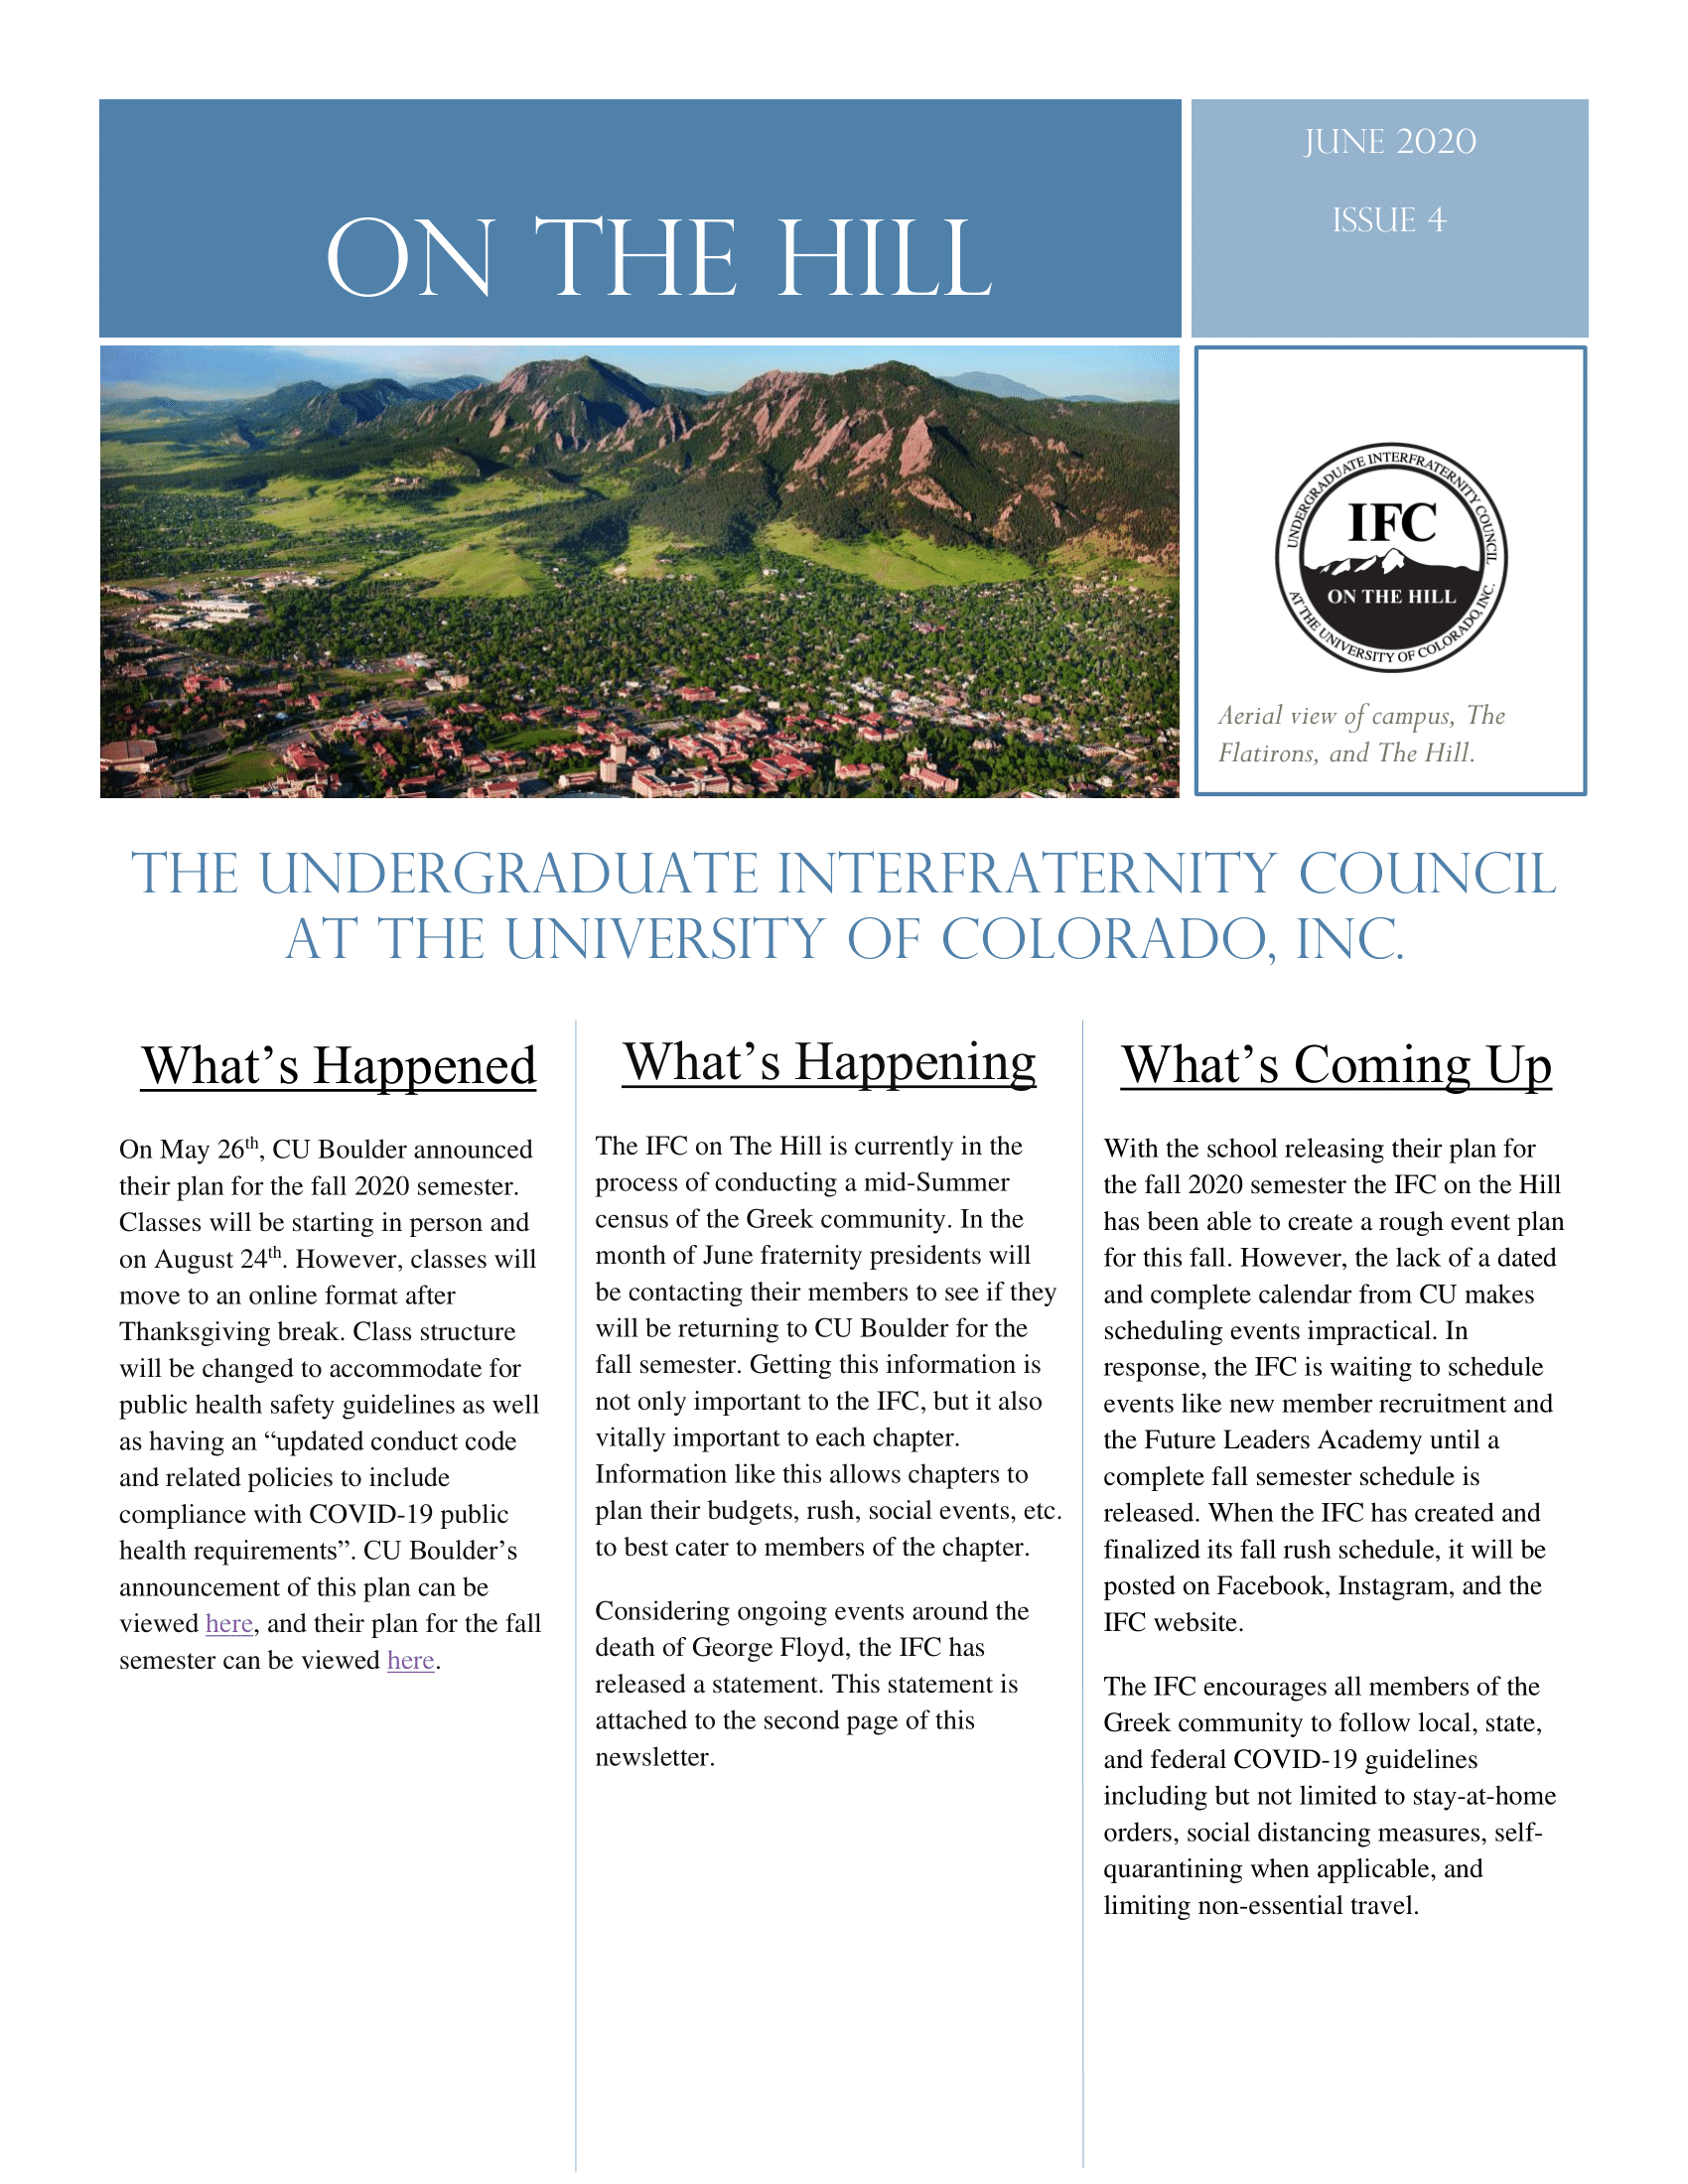 On The Hill Issue #4-1.png